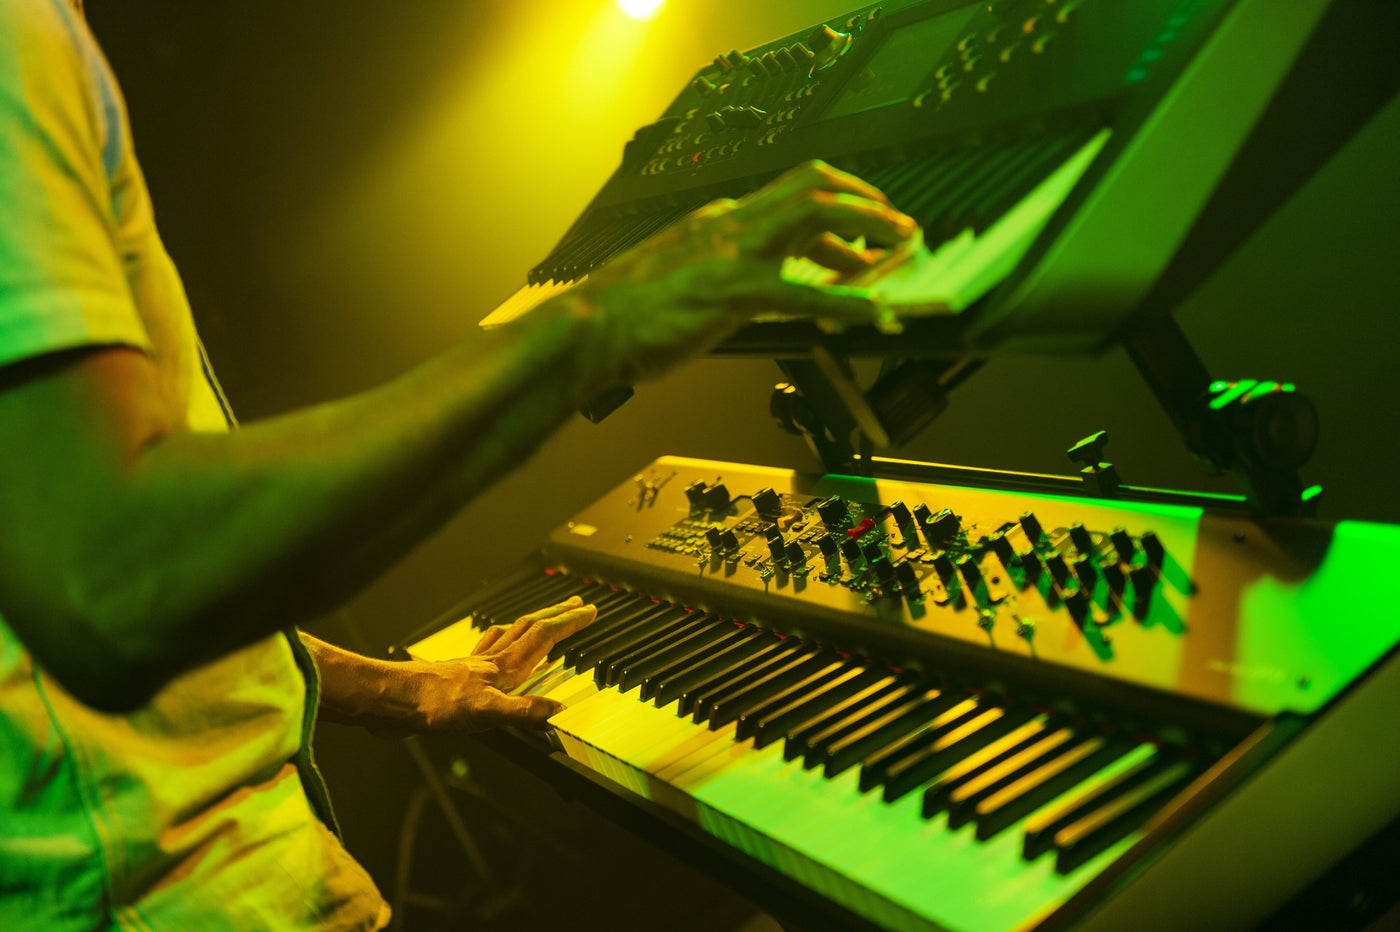 Pianist performing on an electronic keyboard with green stage lighting.